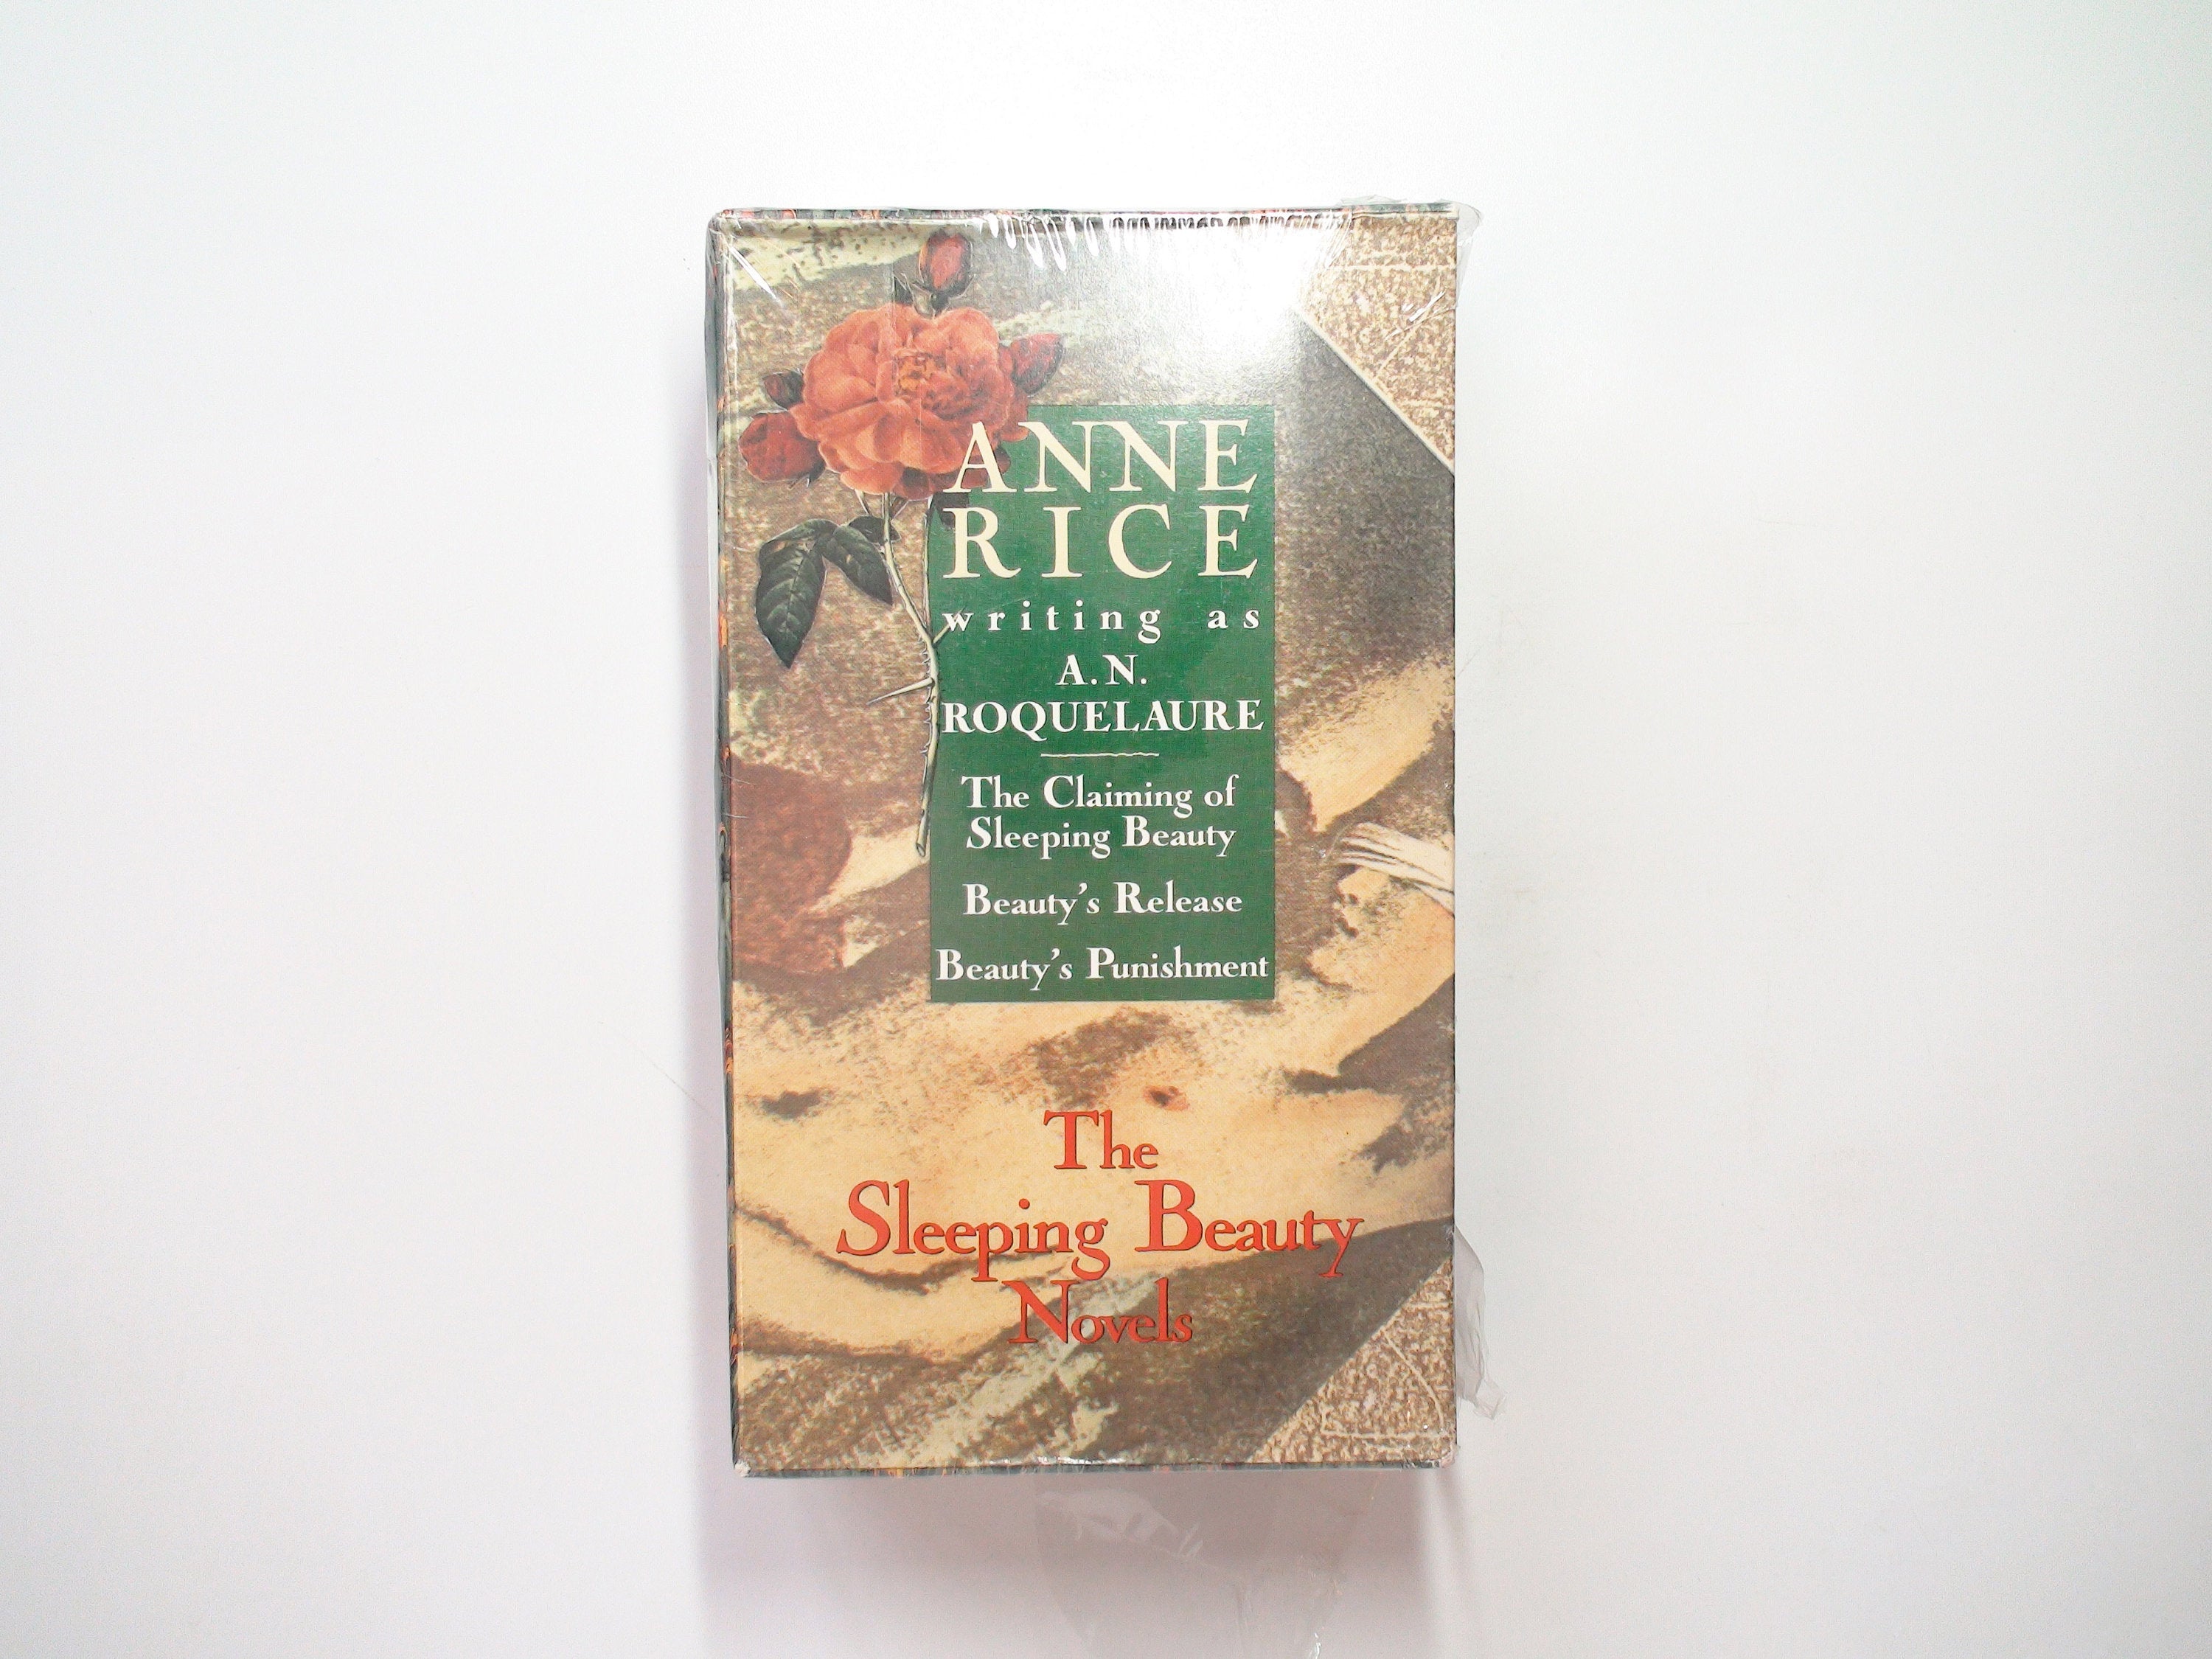 The Sleeping Beauty Novels, A. N. Roquelaure (Anne Rice) Boxed Set, Plume, 1991